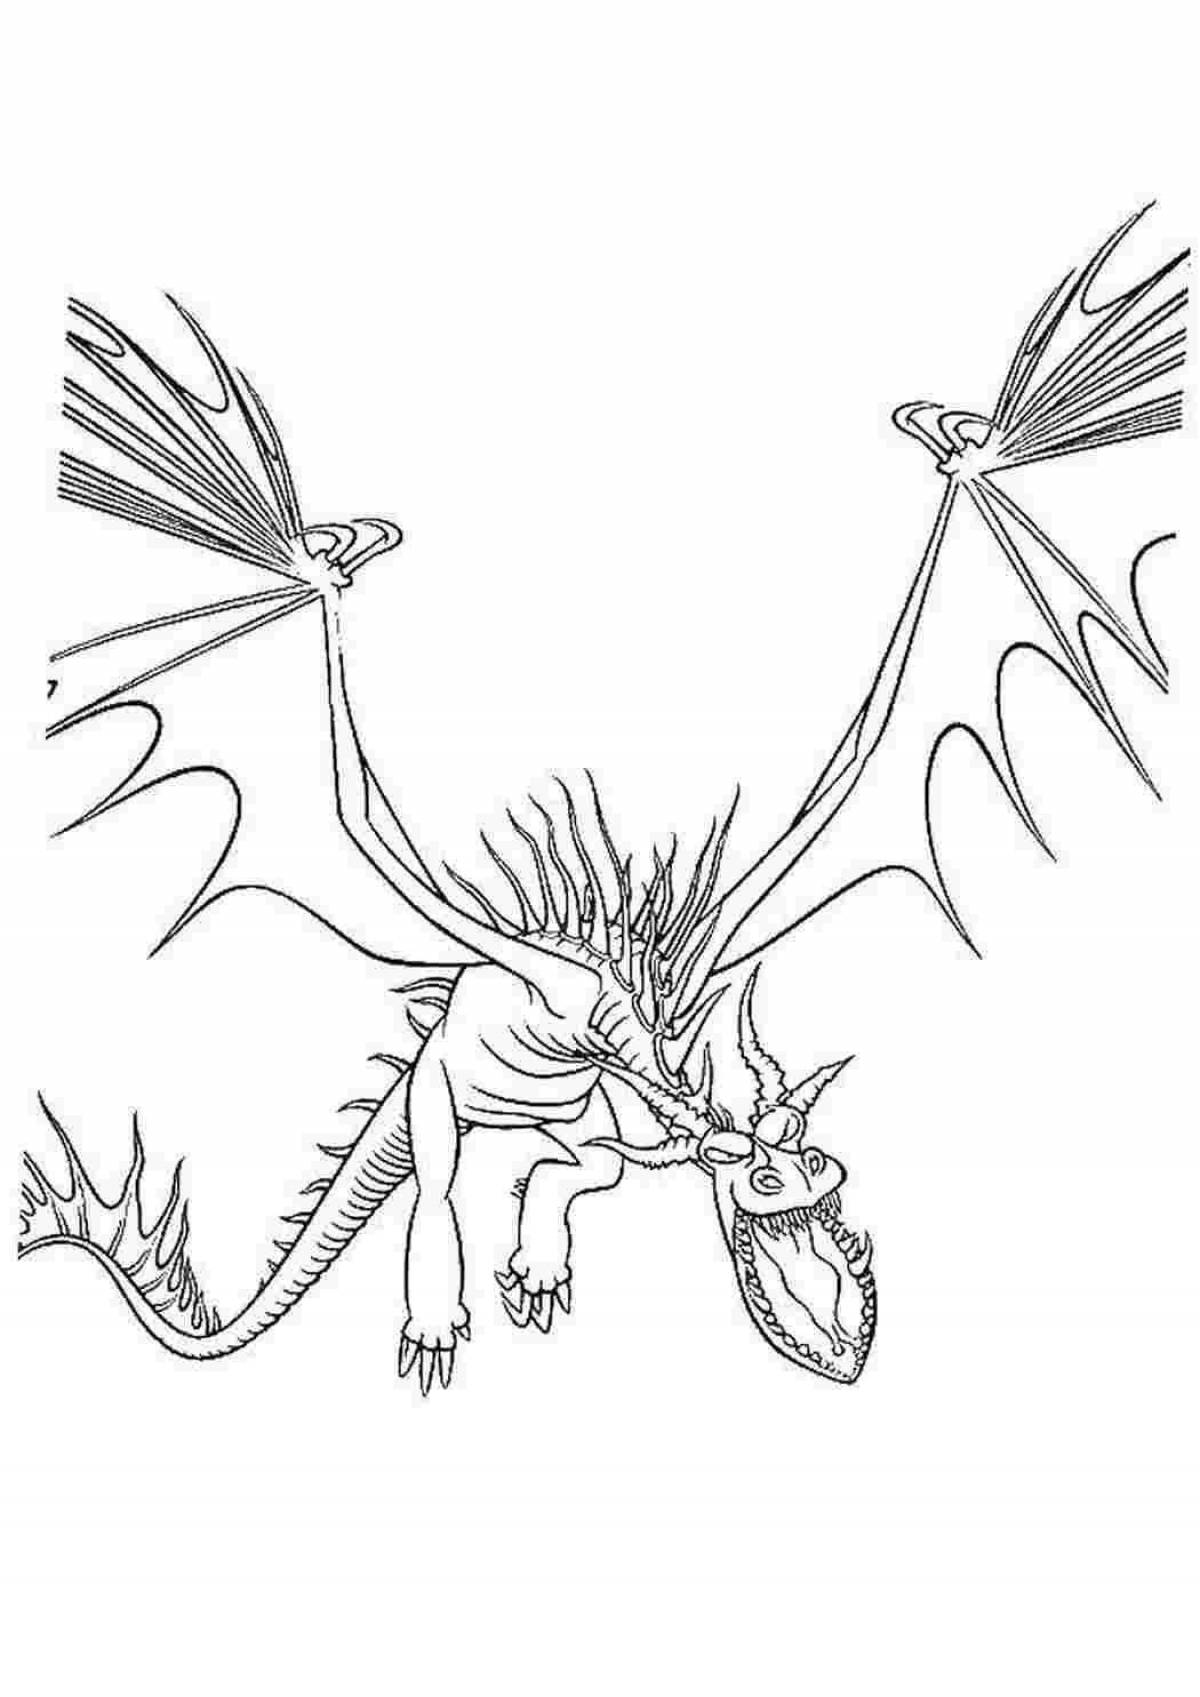 Dazzling boiler how to train your dragon coloring page